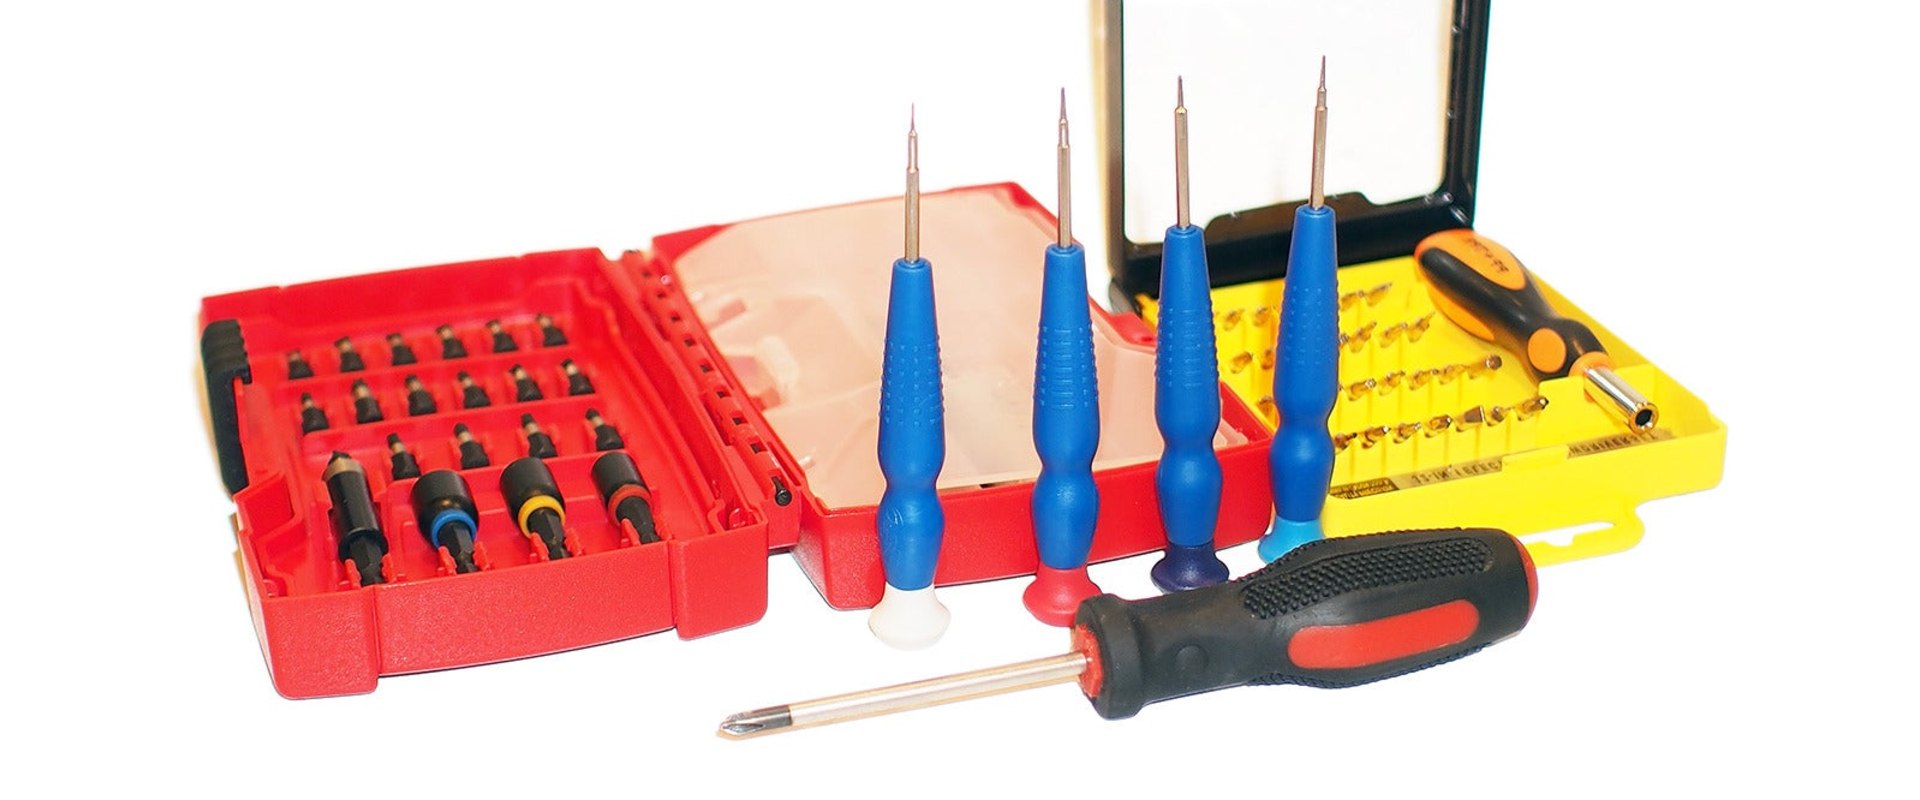 Screwdrivers and Pliers: Everything You Need to Know